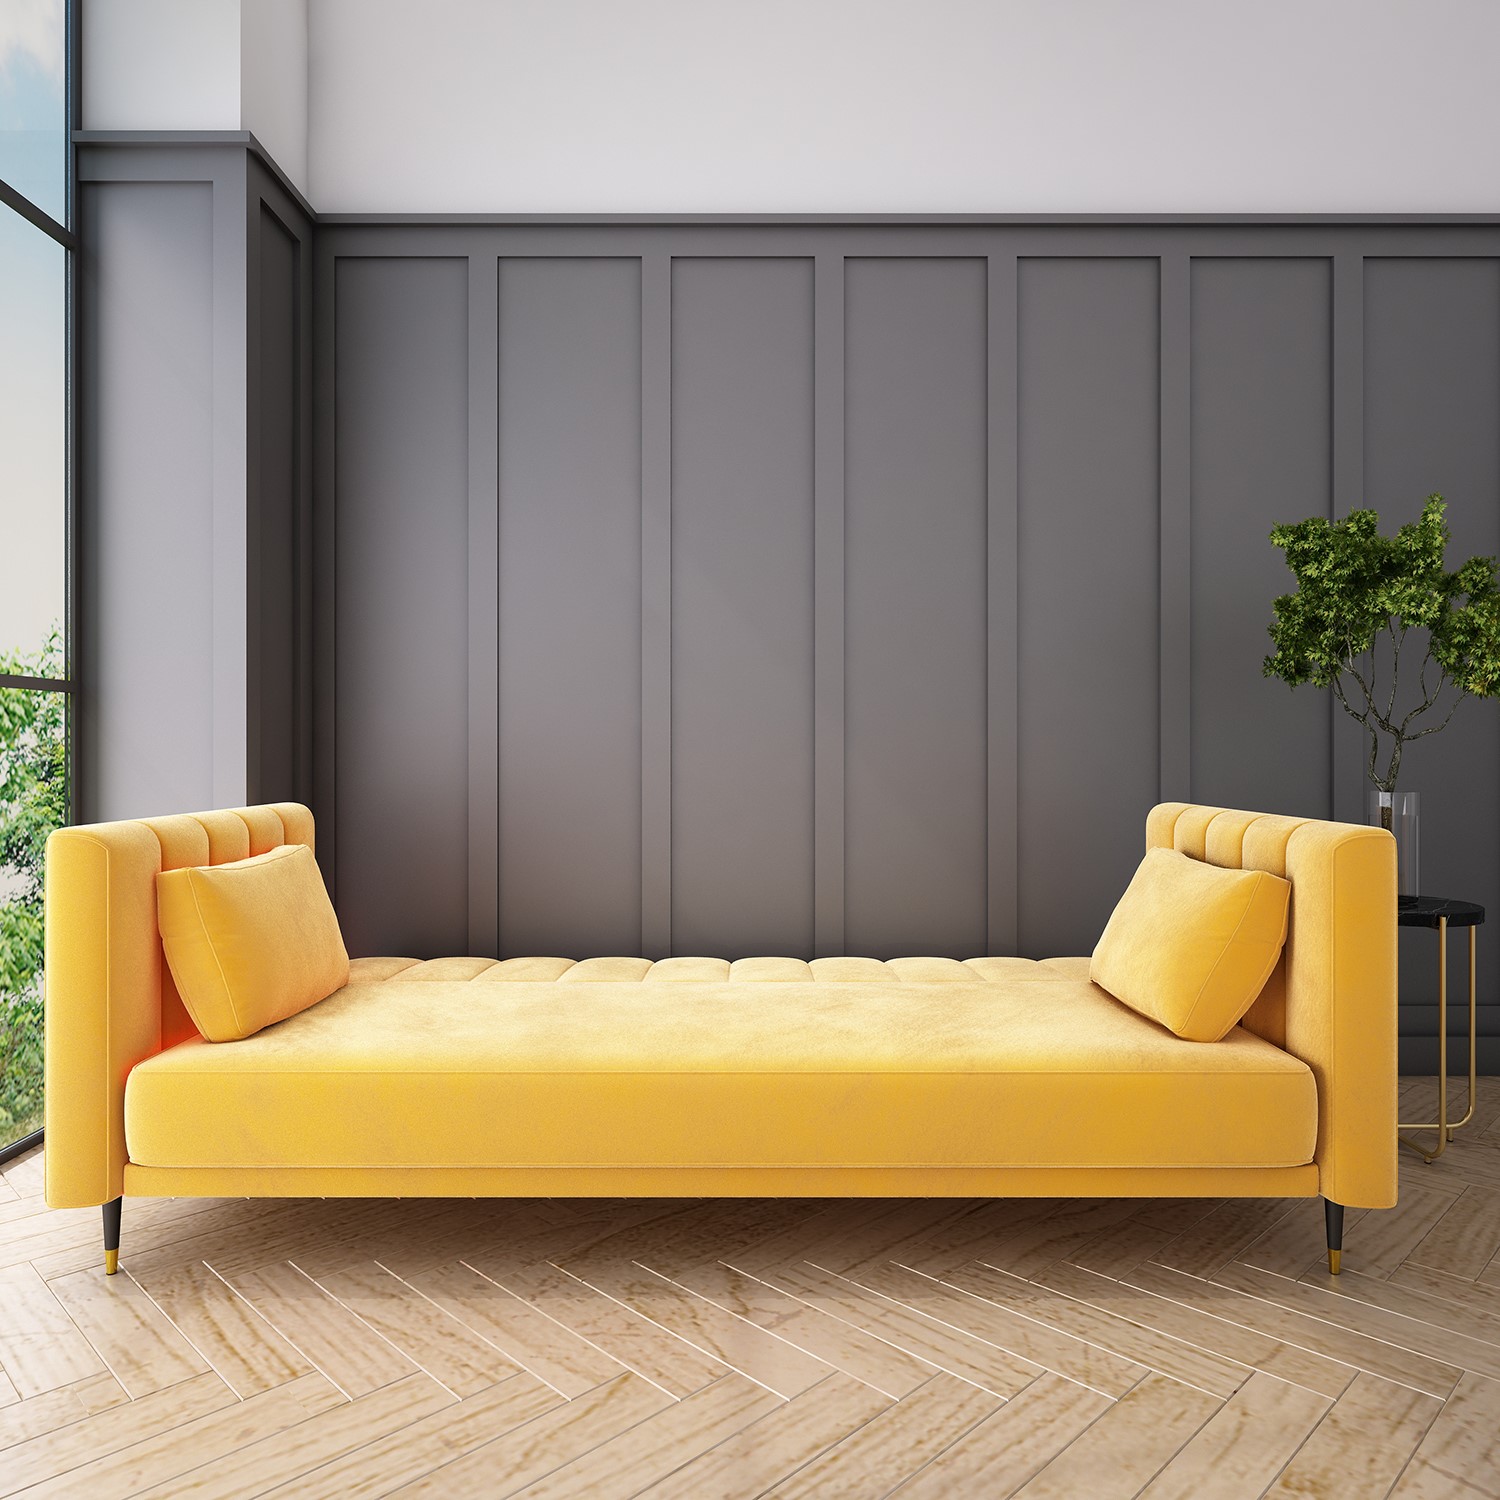 Yellow Velvet 3 Seater Sofa Bed With, What Is The Length Of A 3 Seater Sofa Bed